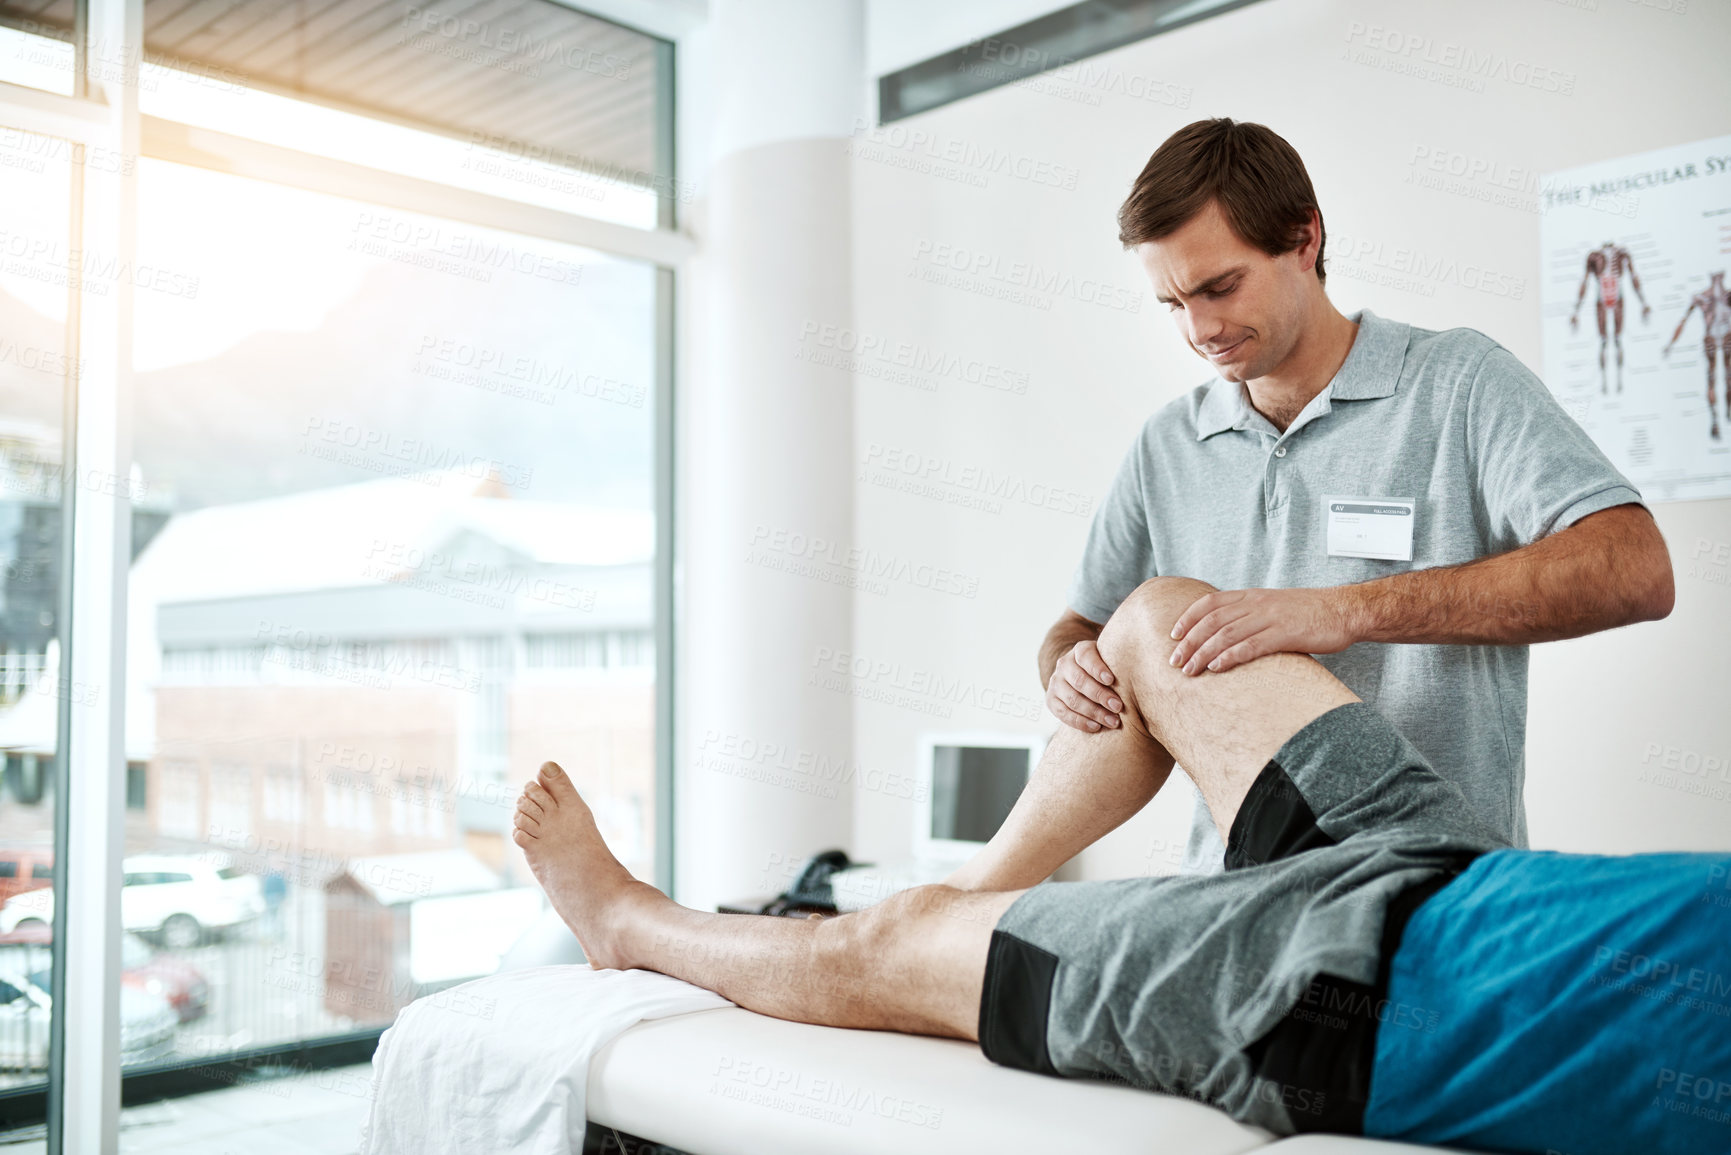 Buy stock photo Shot of a young male physiotherapist helping a client with leg exercises who's lying on a bed